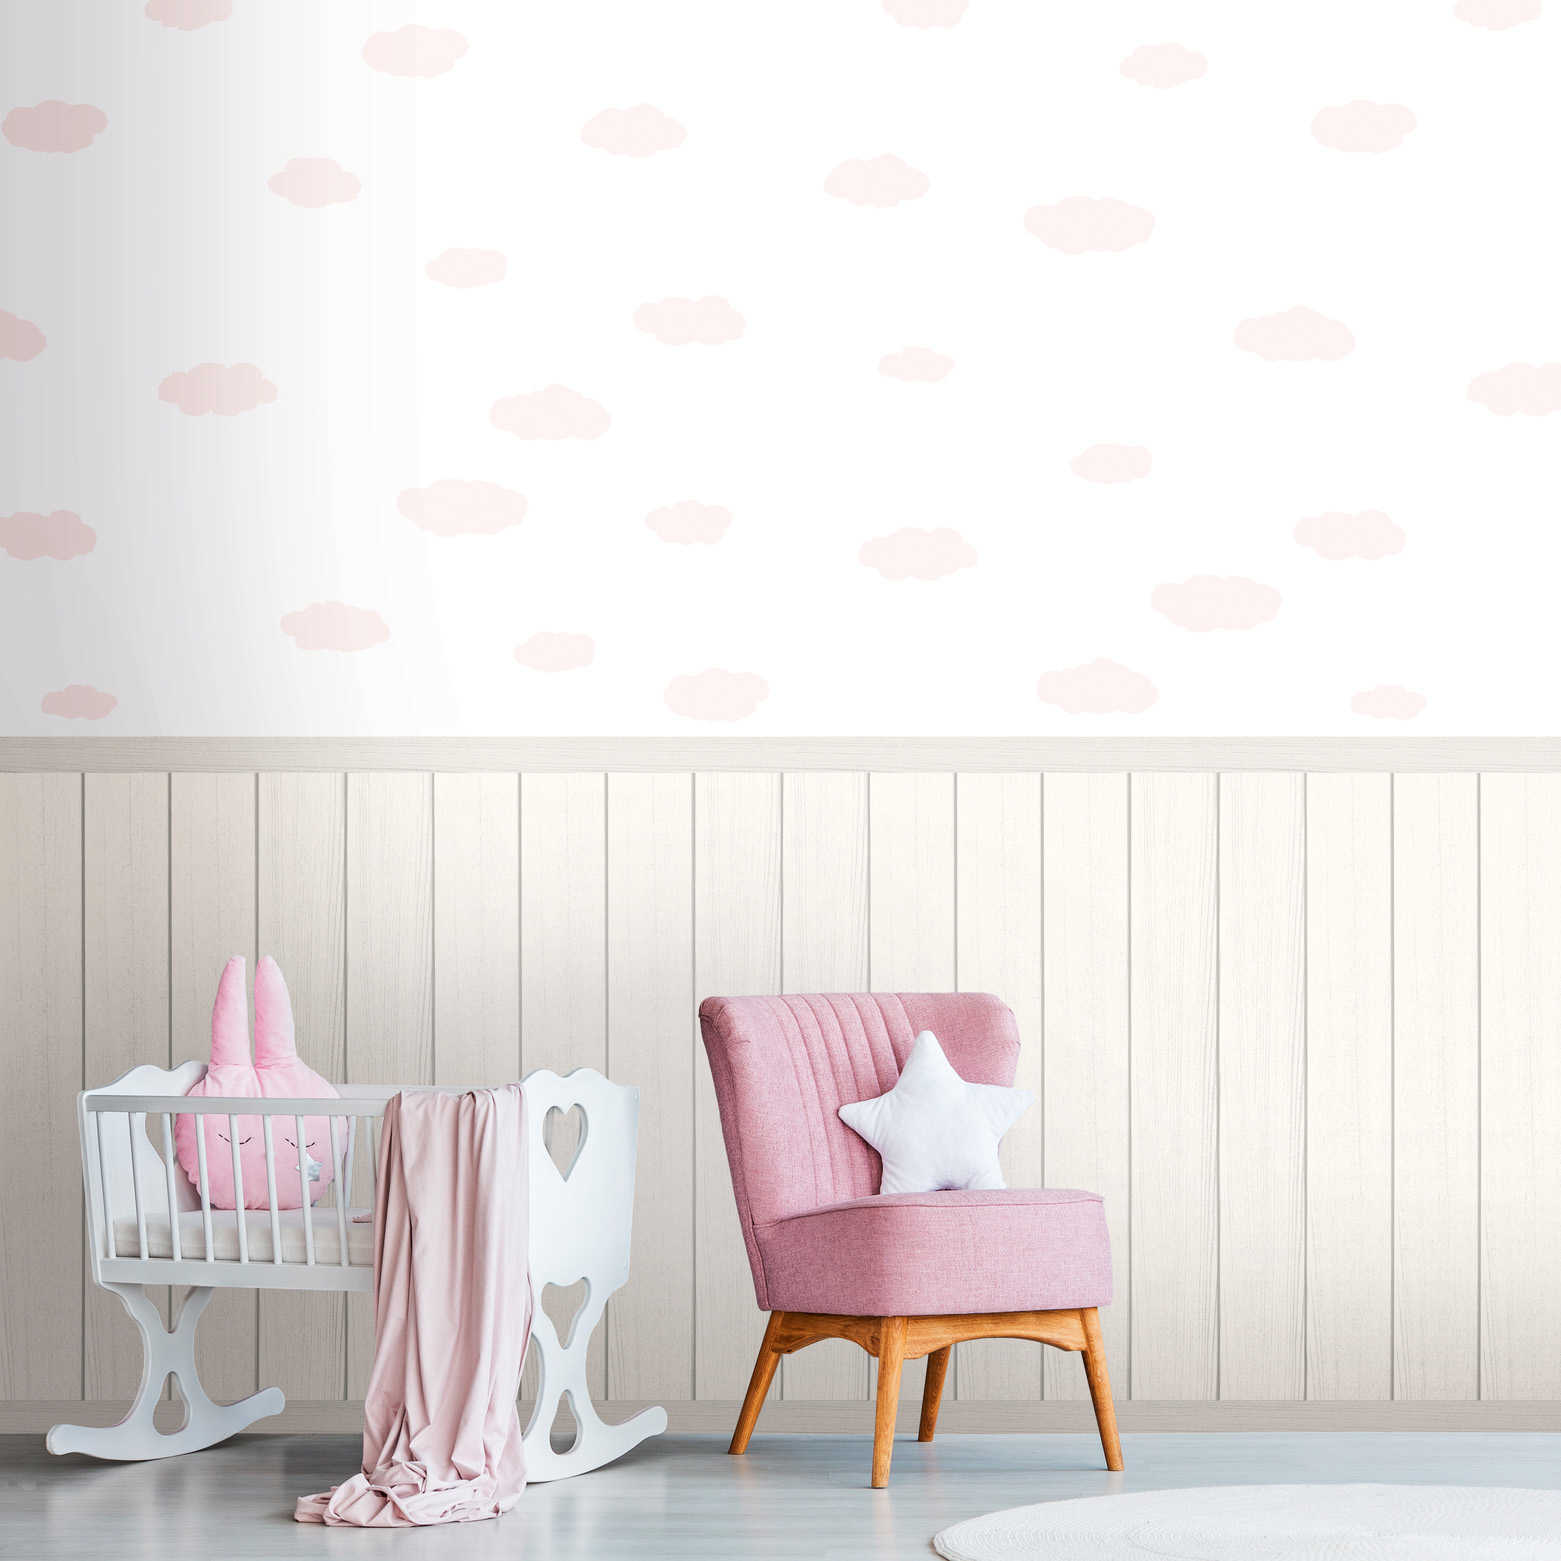 Non-woven motif wallpaper with wood-effect plinth border and cloud pattern - white, pink, grey
